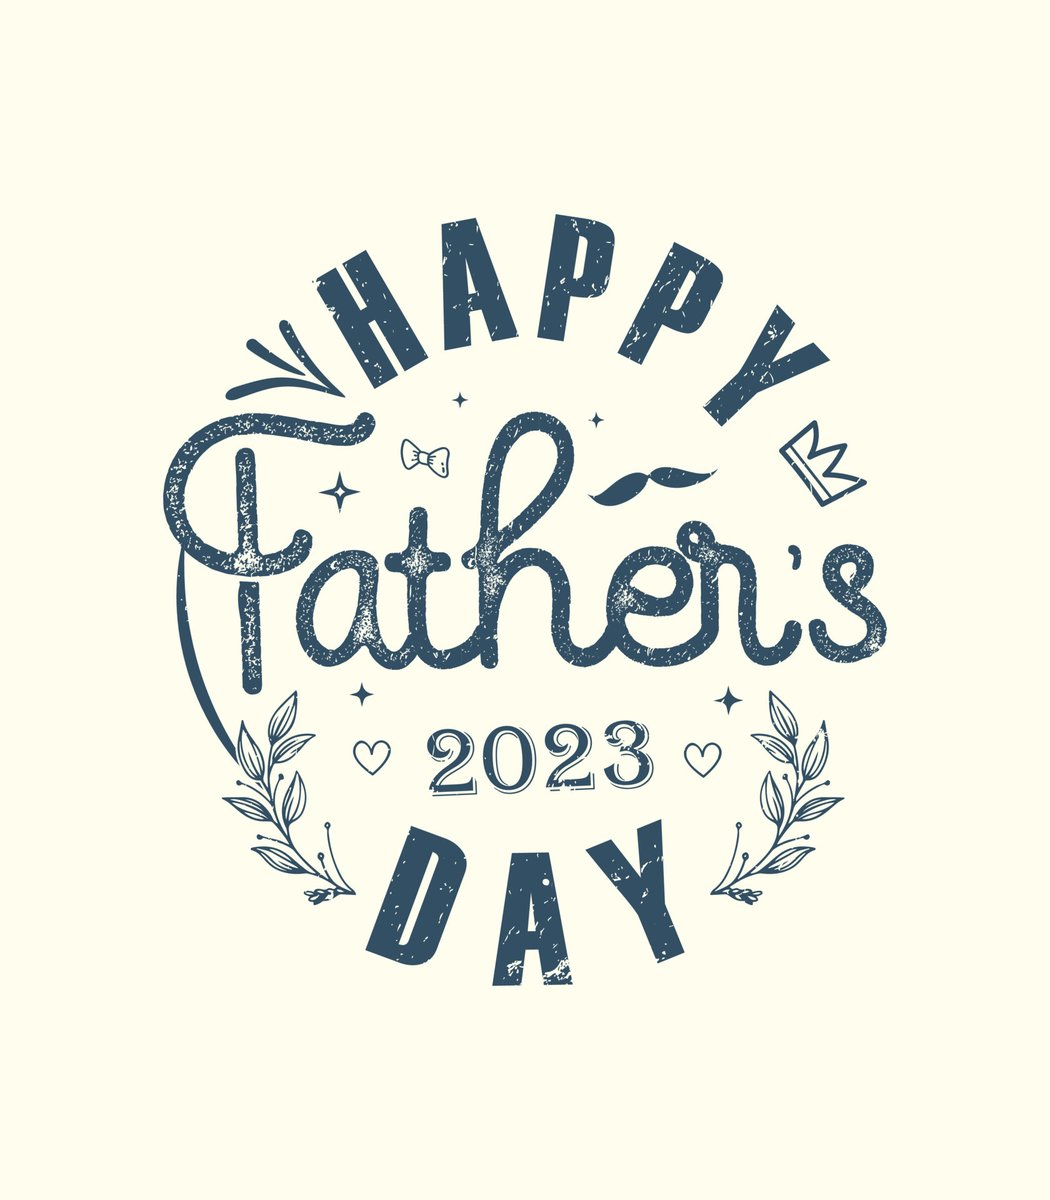 Happy Father's Day weekend to everyone! Enjoy the loving times with your families #elitehomessd #sdrealtor #sdrealestate #SDRealEstateAgent #socalrealestate #socalrealtor #socalrealestateagent #localrealtor #buyandsellagent #sdhomes #socalhomes